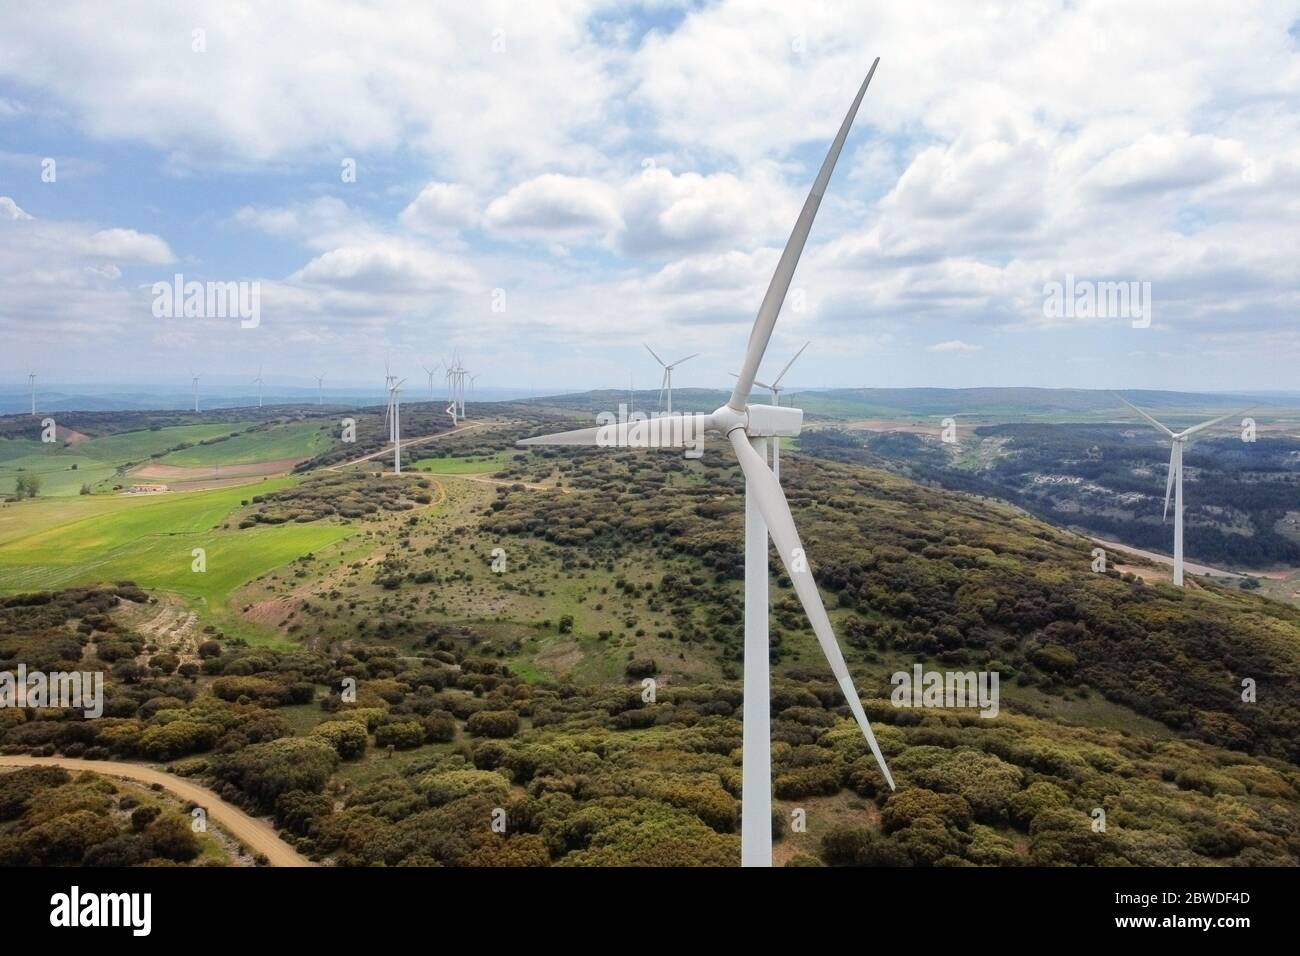 Aerial view of windmills farm for clean energy production on beautiful cloudy sky. Wind power turbines generating clean renewable energy for sustainable development . Stock Photo